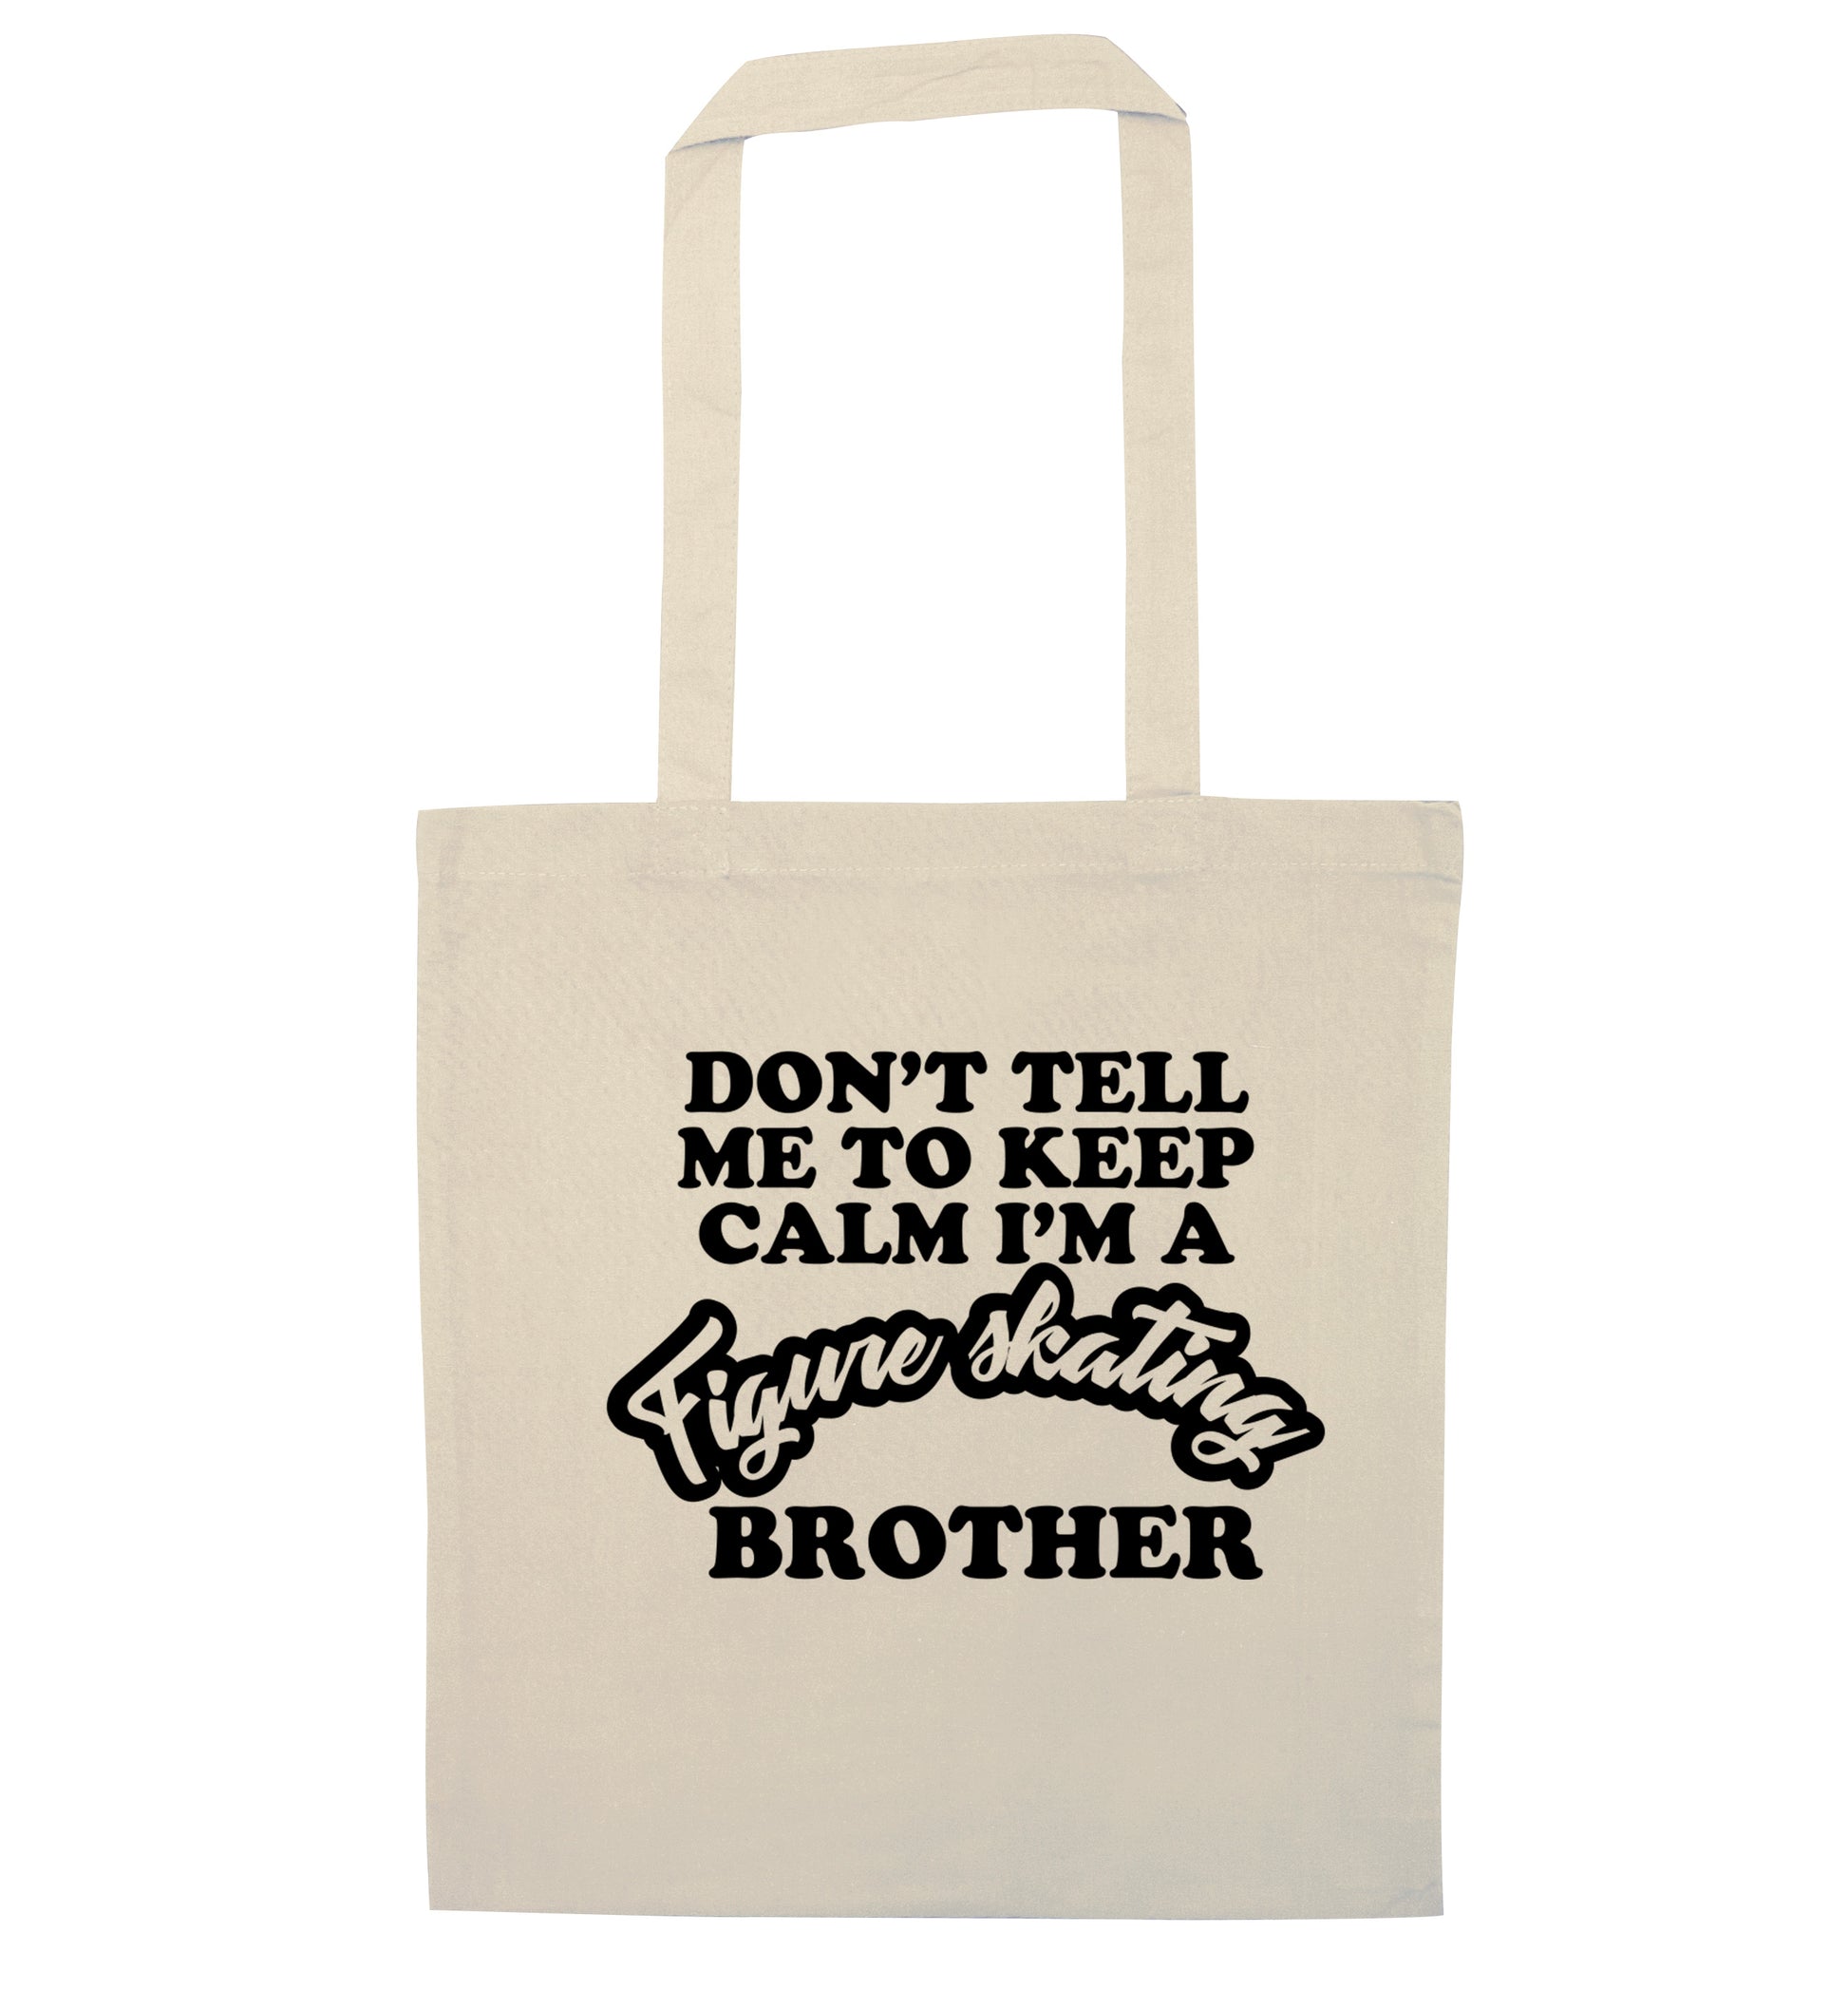 Don't tell me to keep calm I'm a figure skating brother natural tote bag